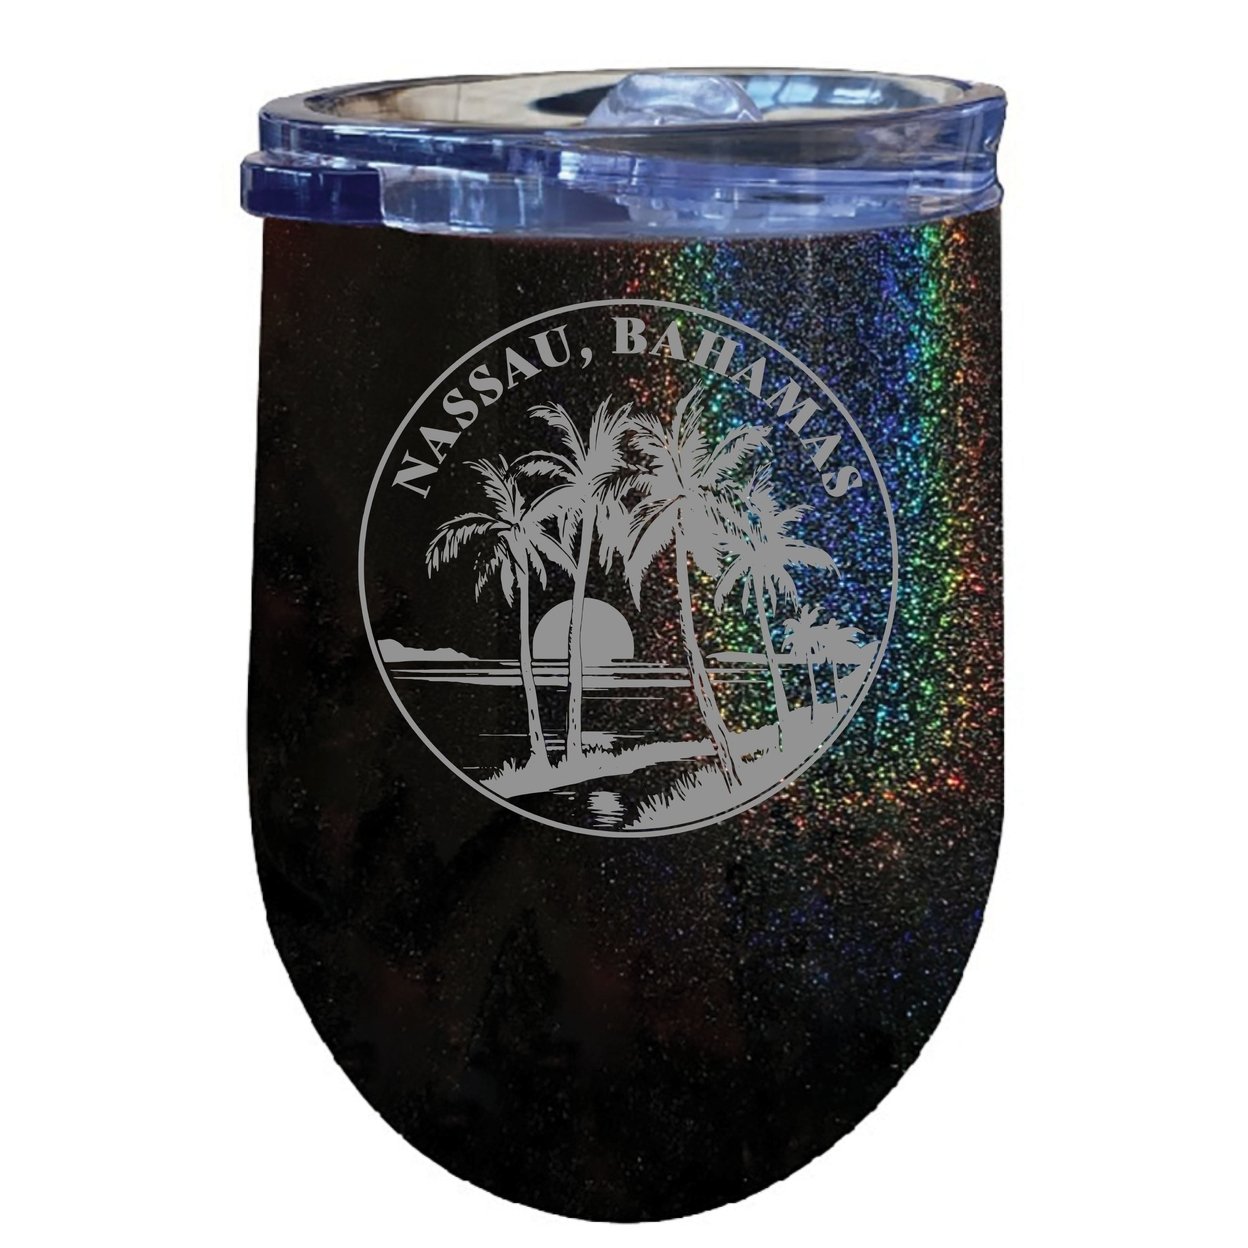 Nassau The Bahamas Souvenir 12 Oz Engraved Insulated Wine Stainless Steel Tumbler - Purple,,2-Pack